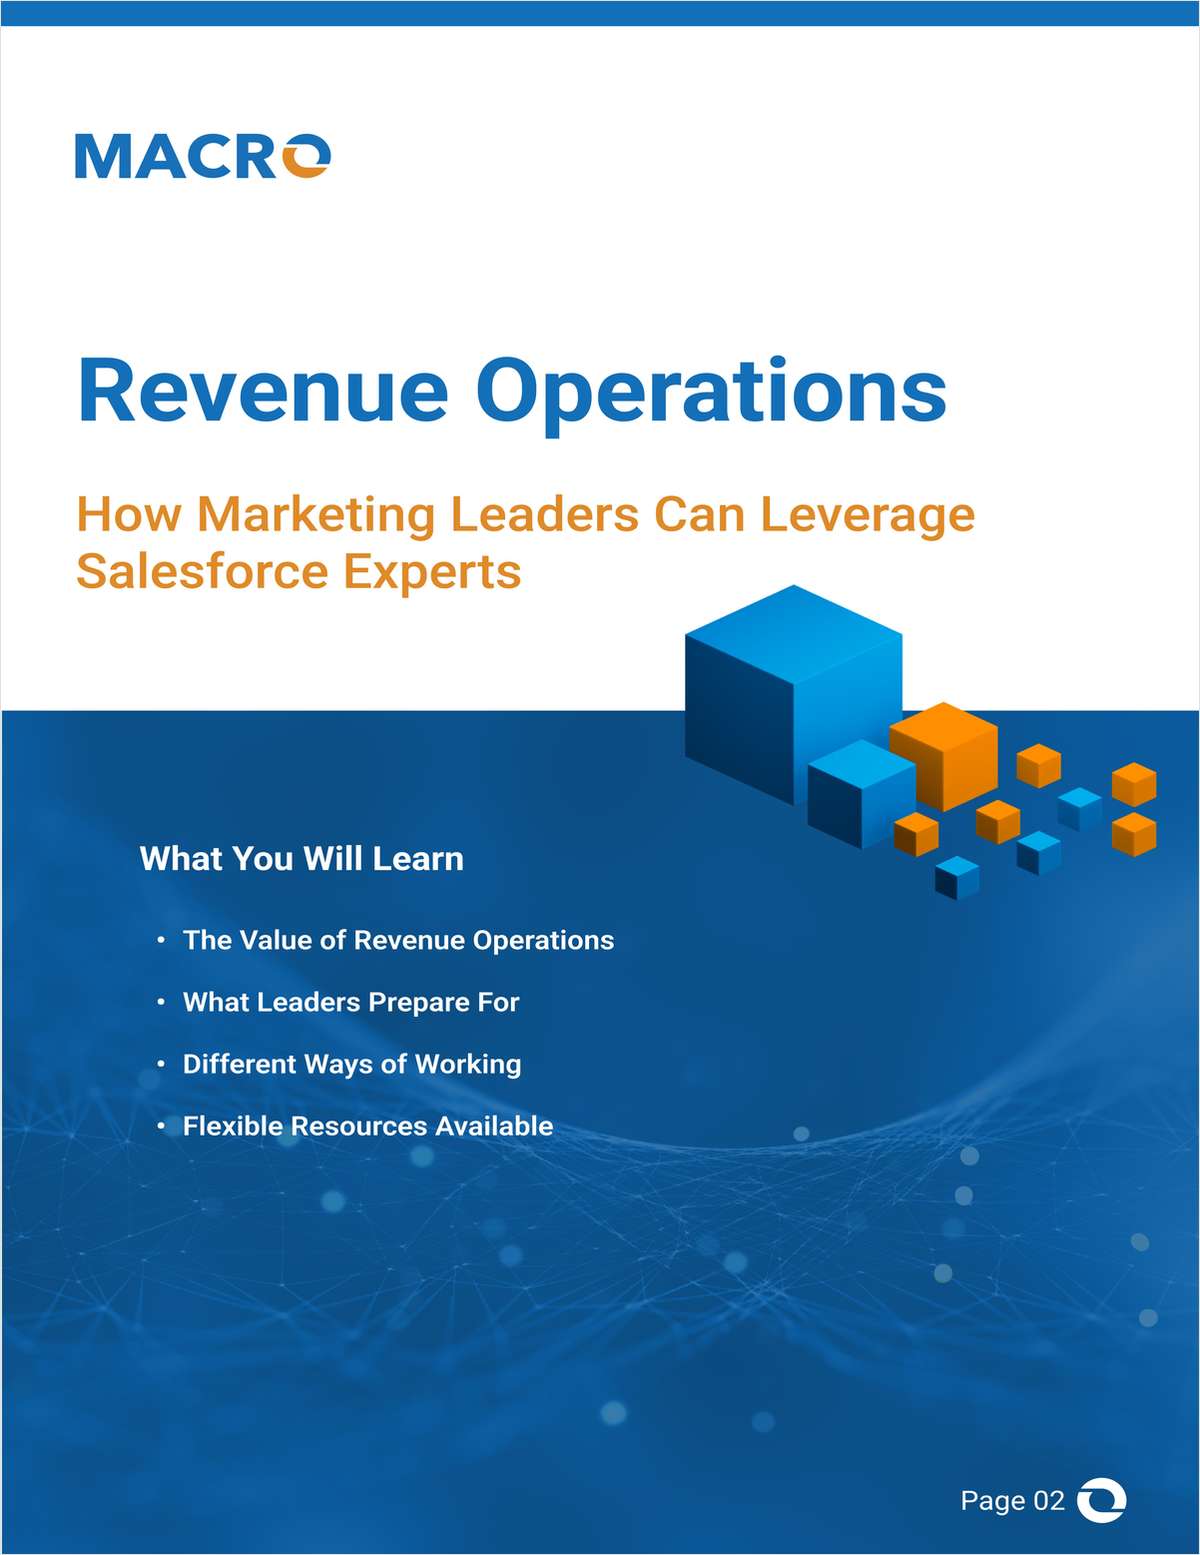 How Marketing Leaders Can Leverage Salesforce Experts